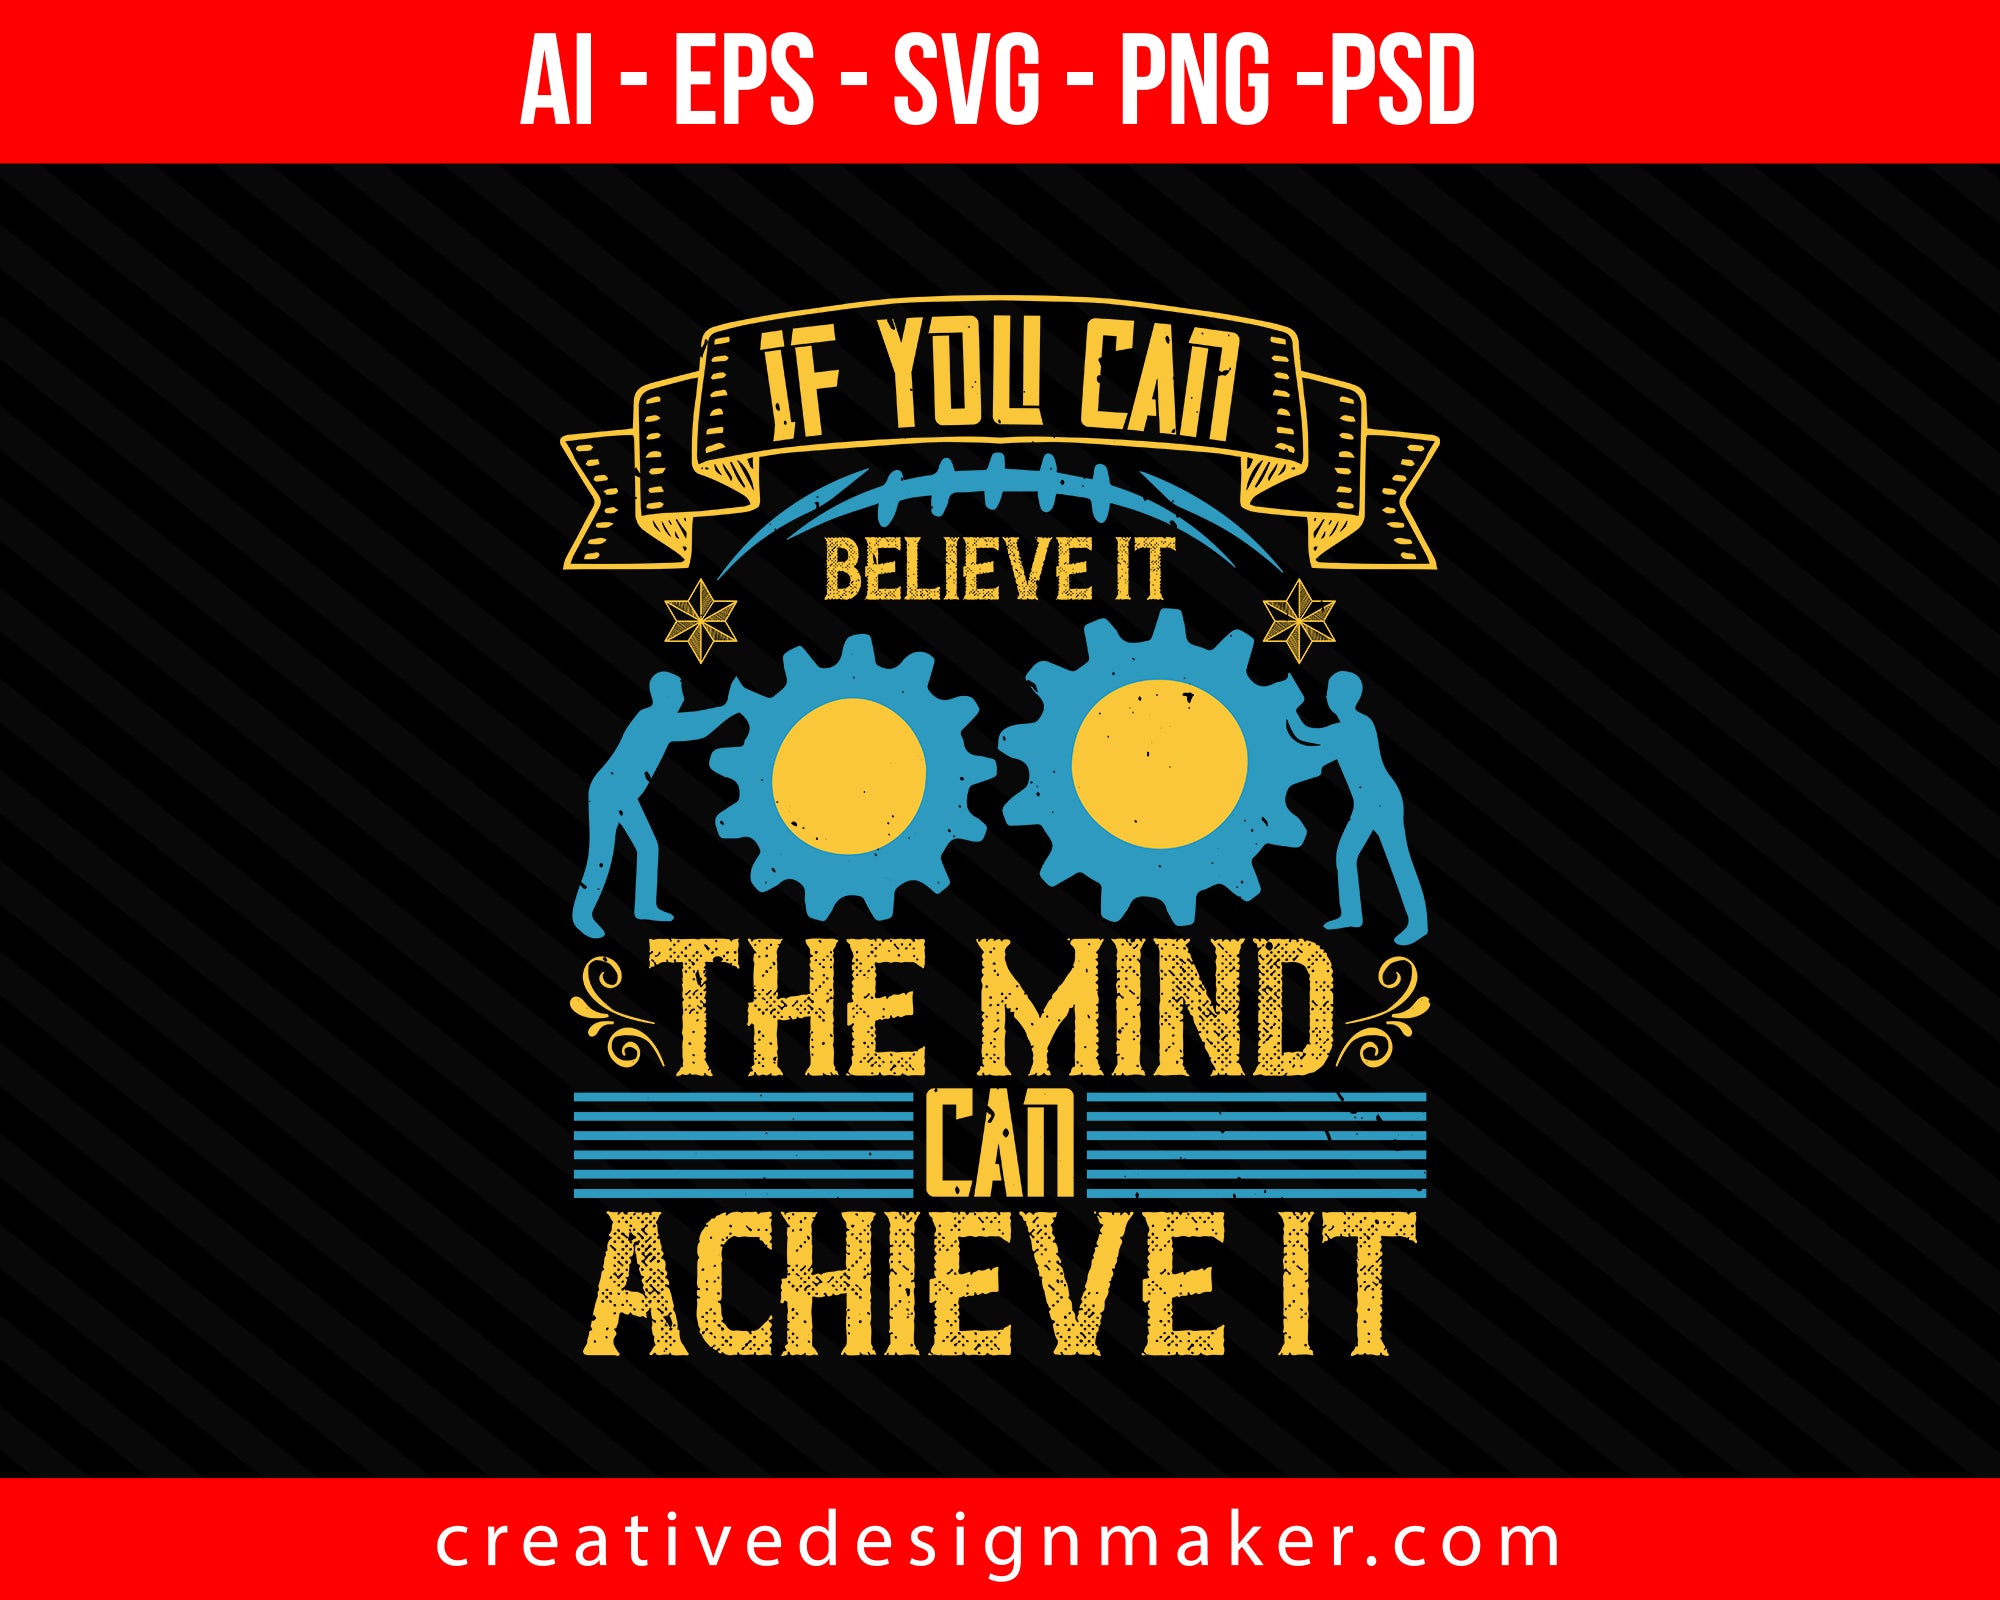 If you can believe it, the mind can achieve it Coaching Print Ready Editable T-Shirt SVG Design!